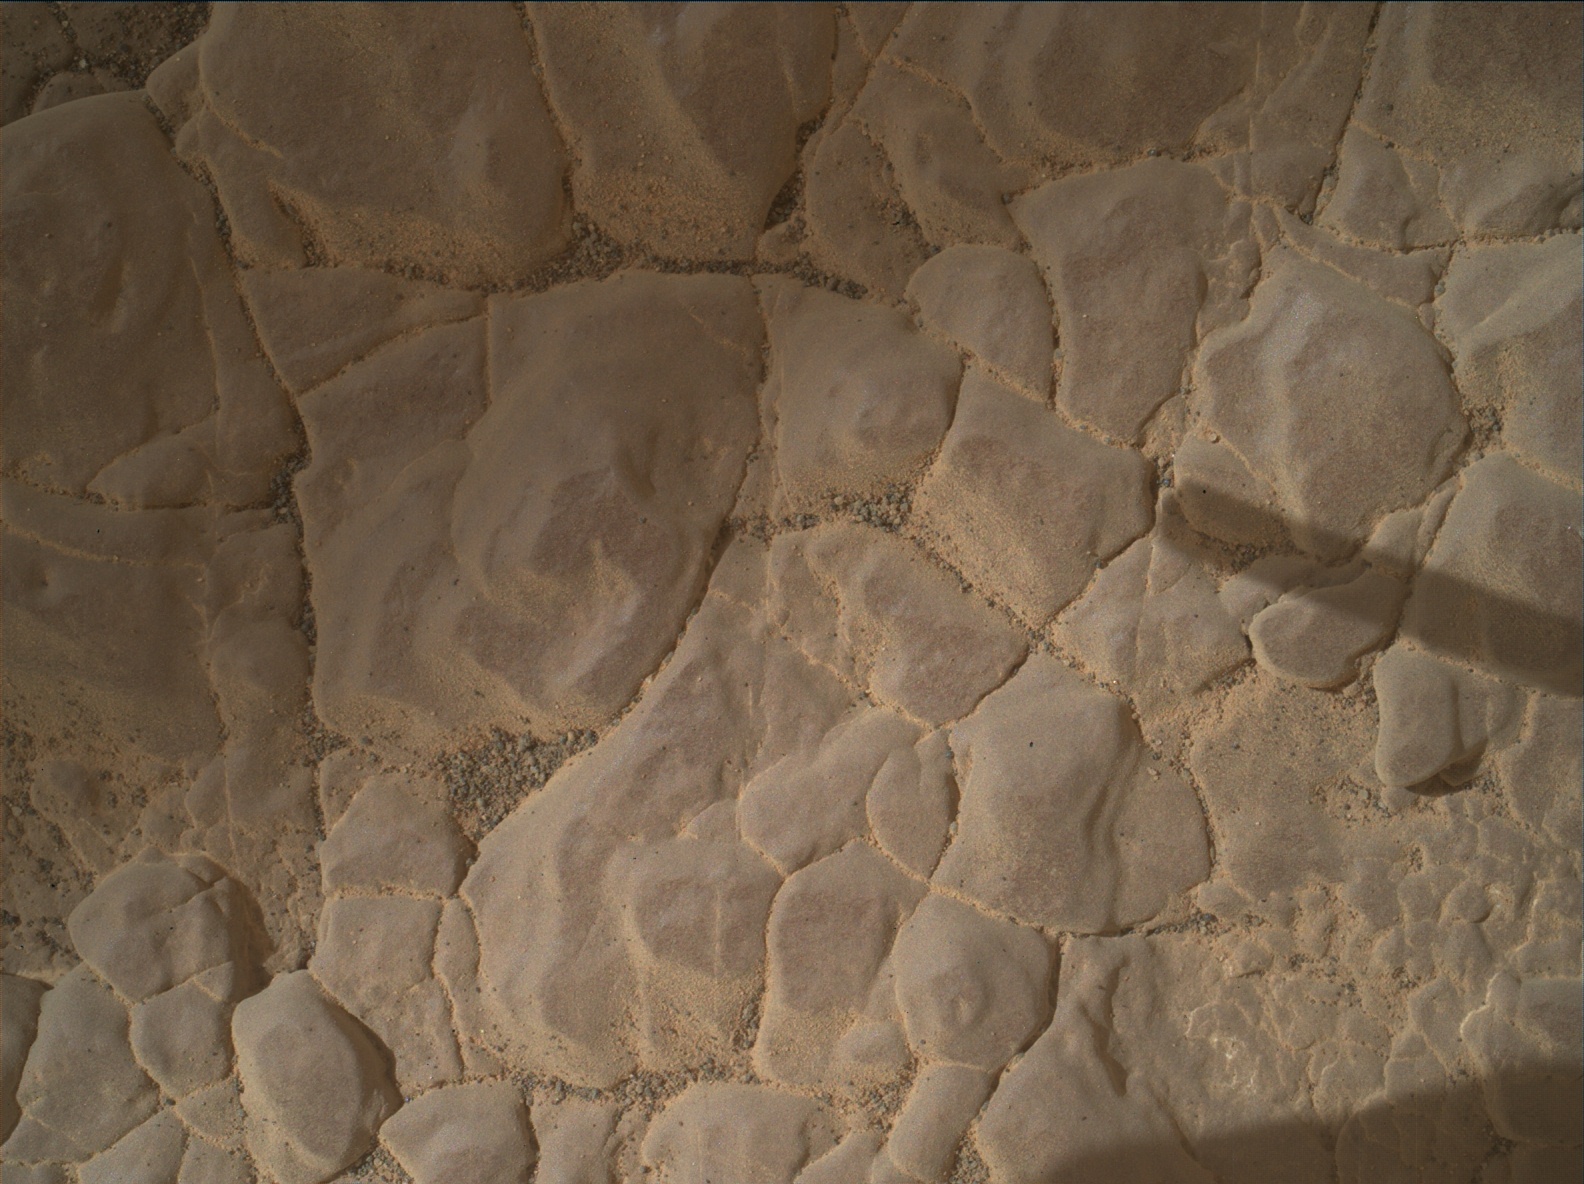 Nasa's Mars rover Curiosity acquired this image using its Mars Hand Lens Imager (MAHLI) on Sol 3011